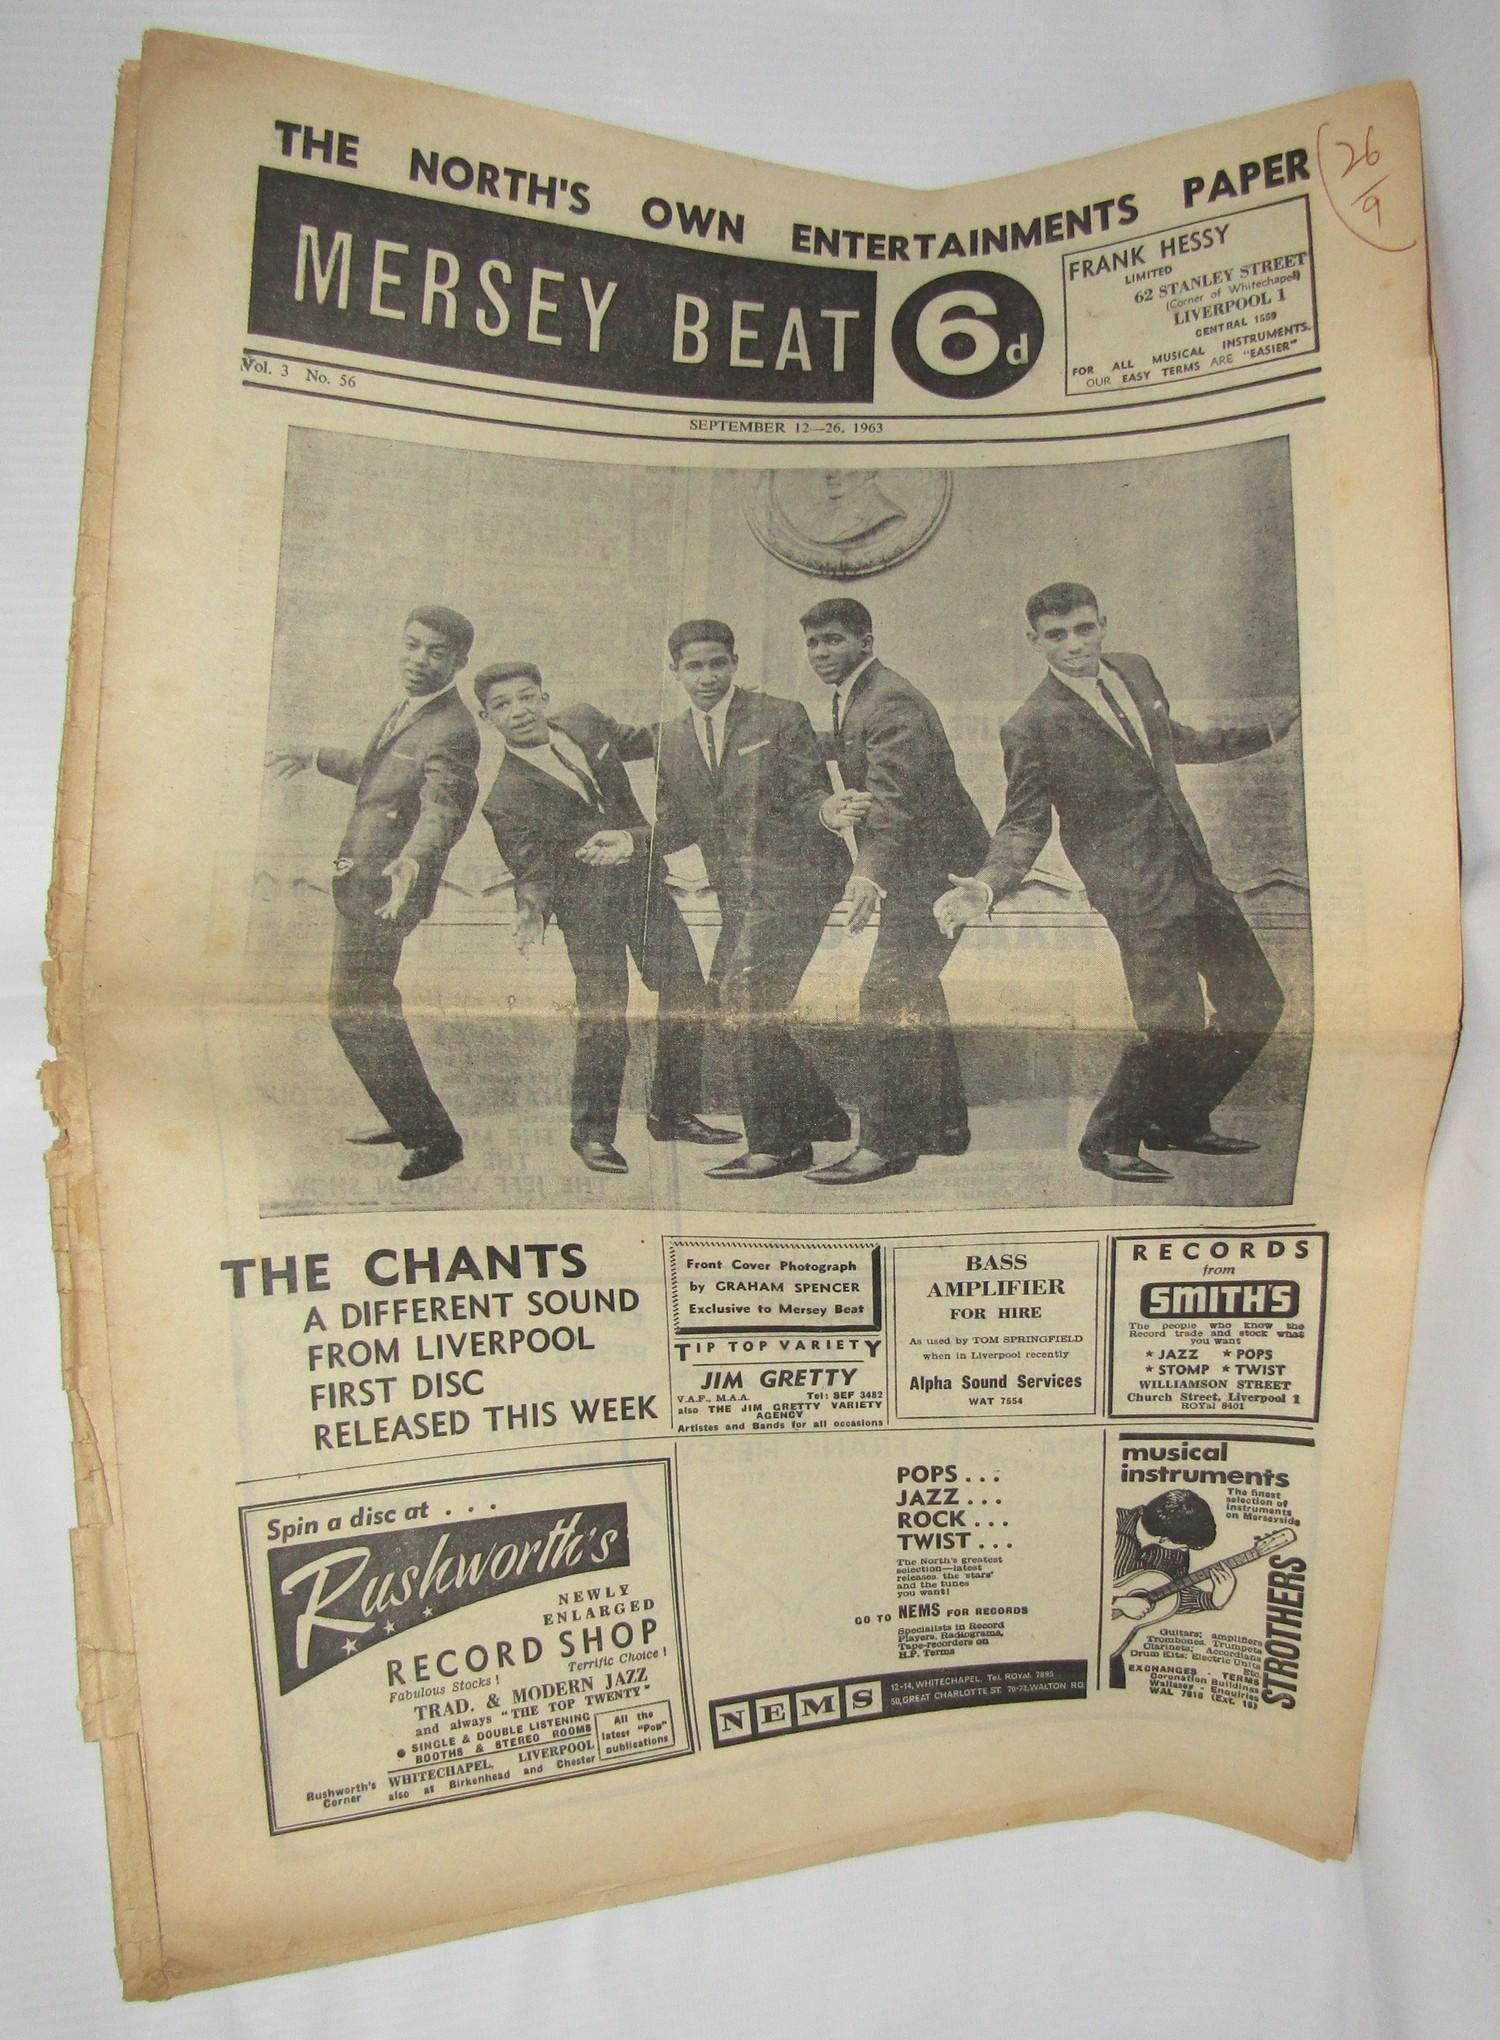 Mersey beat Vol 3 No 56 September 12-26 1963 with The Chants on front cover